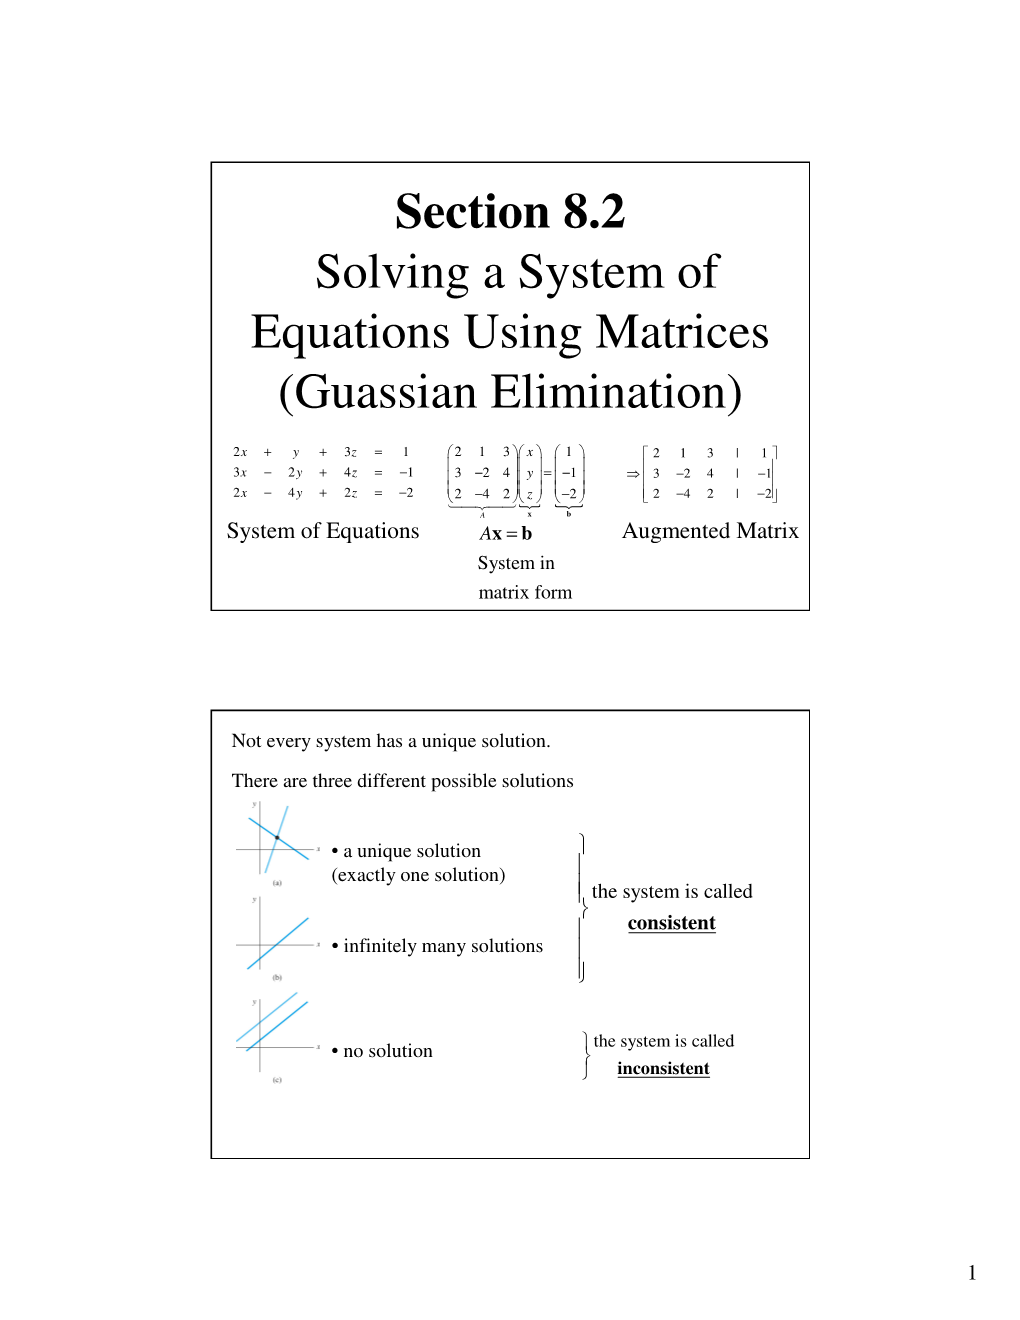 Gaussian Elimination Gauss-Jordan Elimination the Solution Is Then Found by the Solution Is Then Found by Back-Substitution Inspection Or by a Few Simple Steps